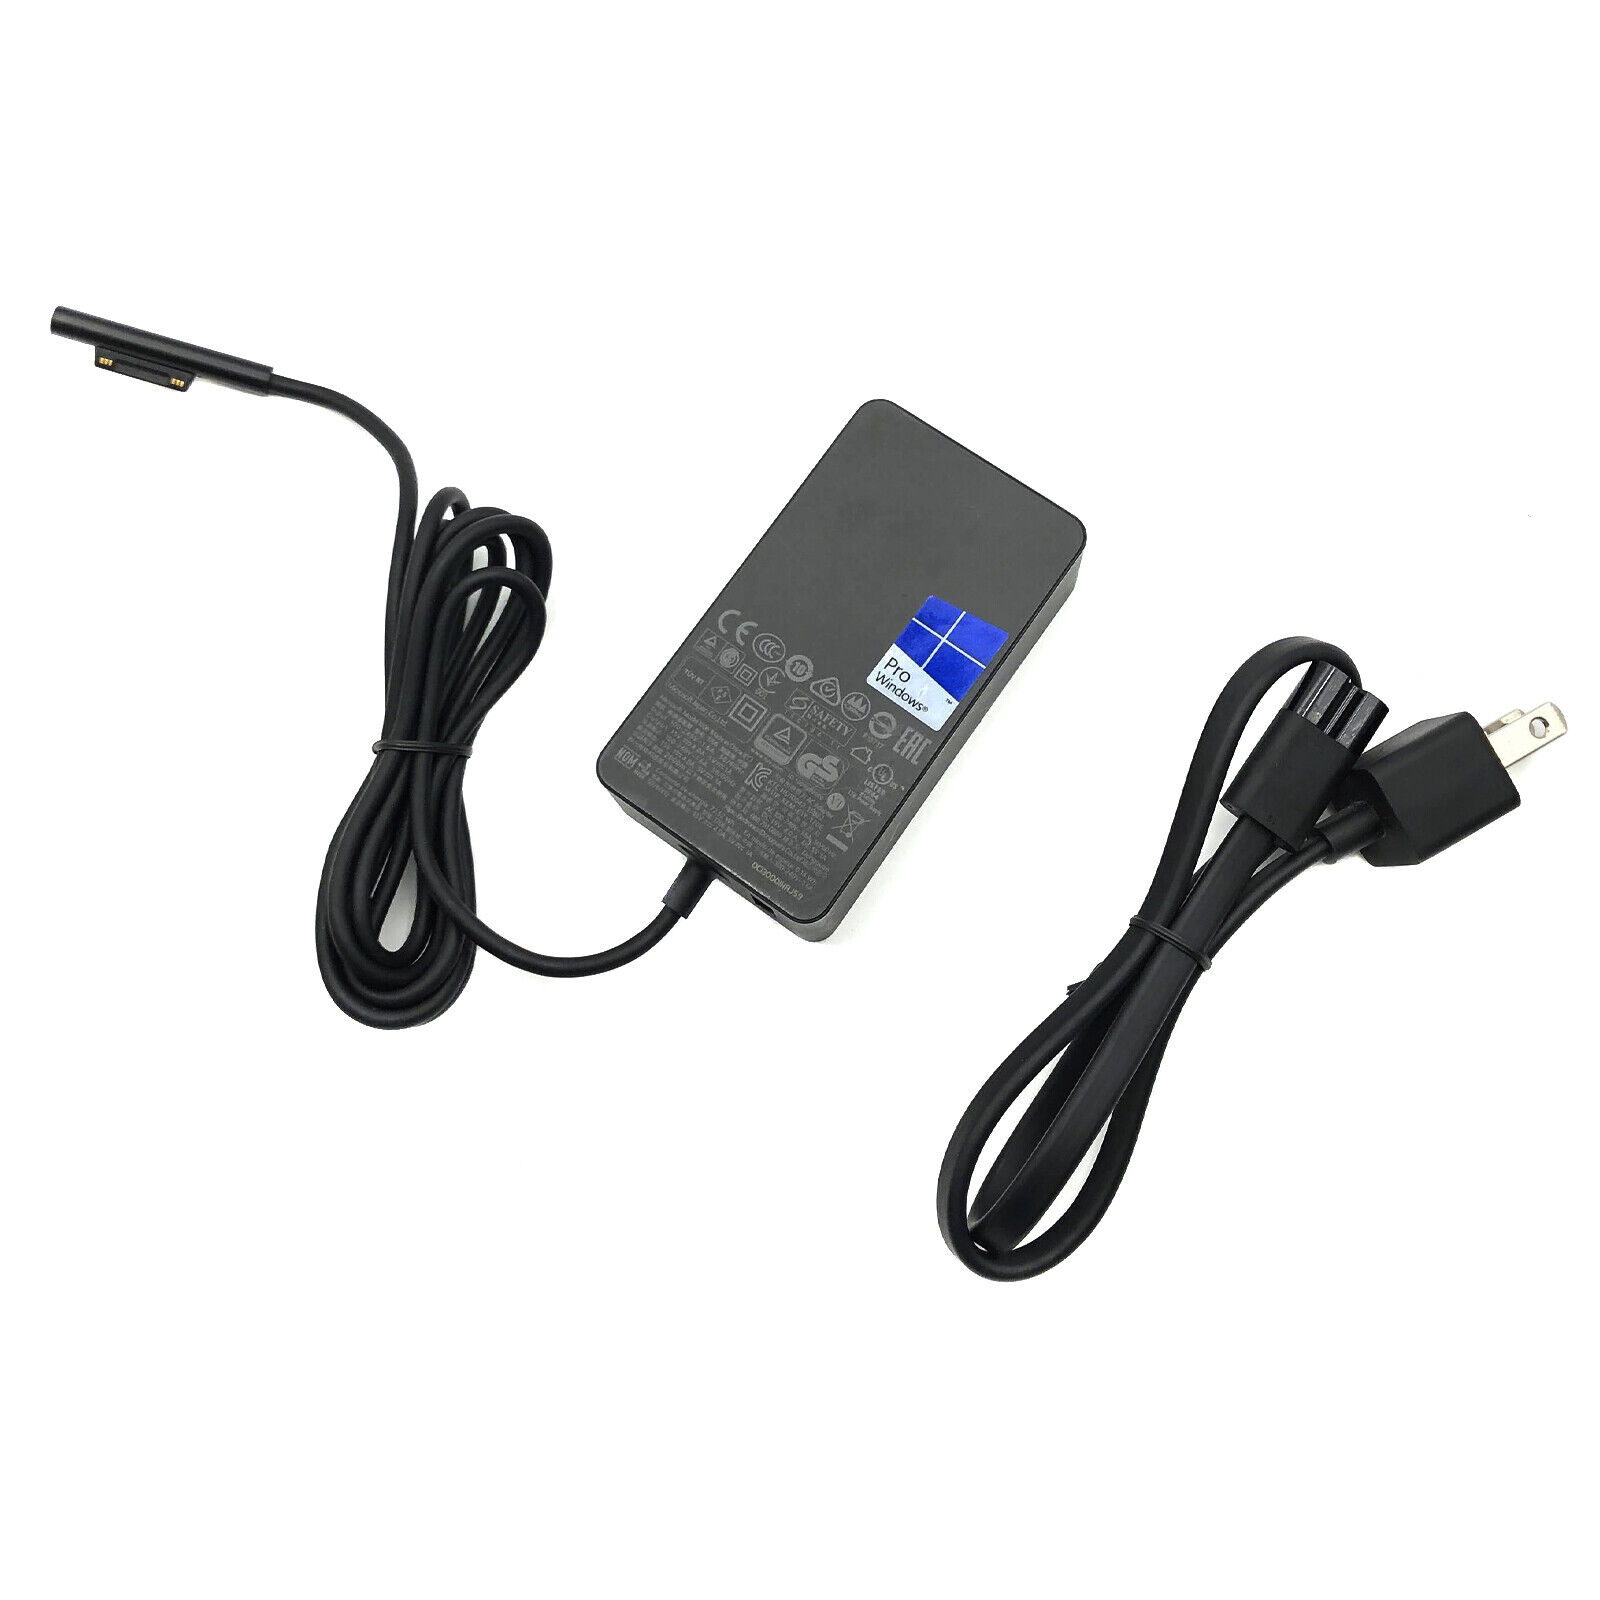 Genuine Microsoft 65W AC Adapter for Surface PRO 4 6 7 7+ 8 X GO 1 2 3 w/Cord